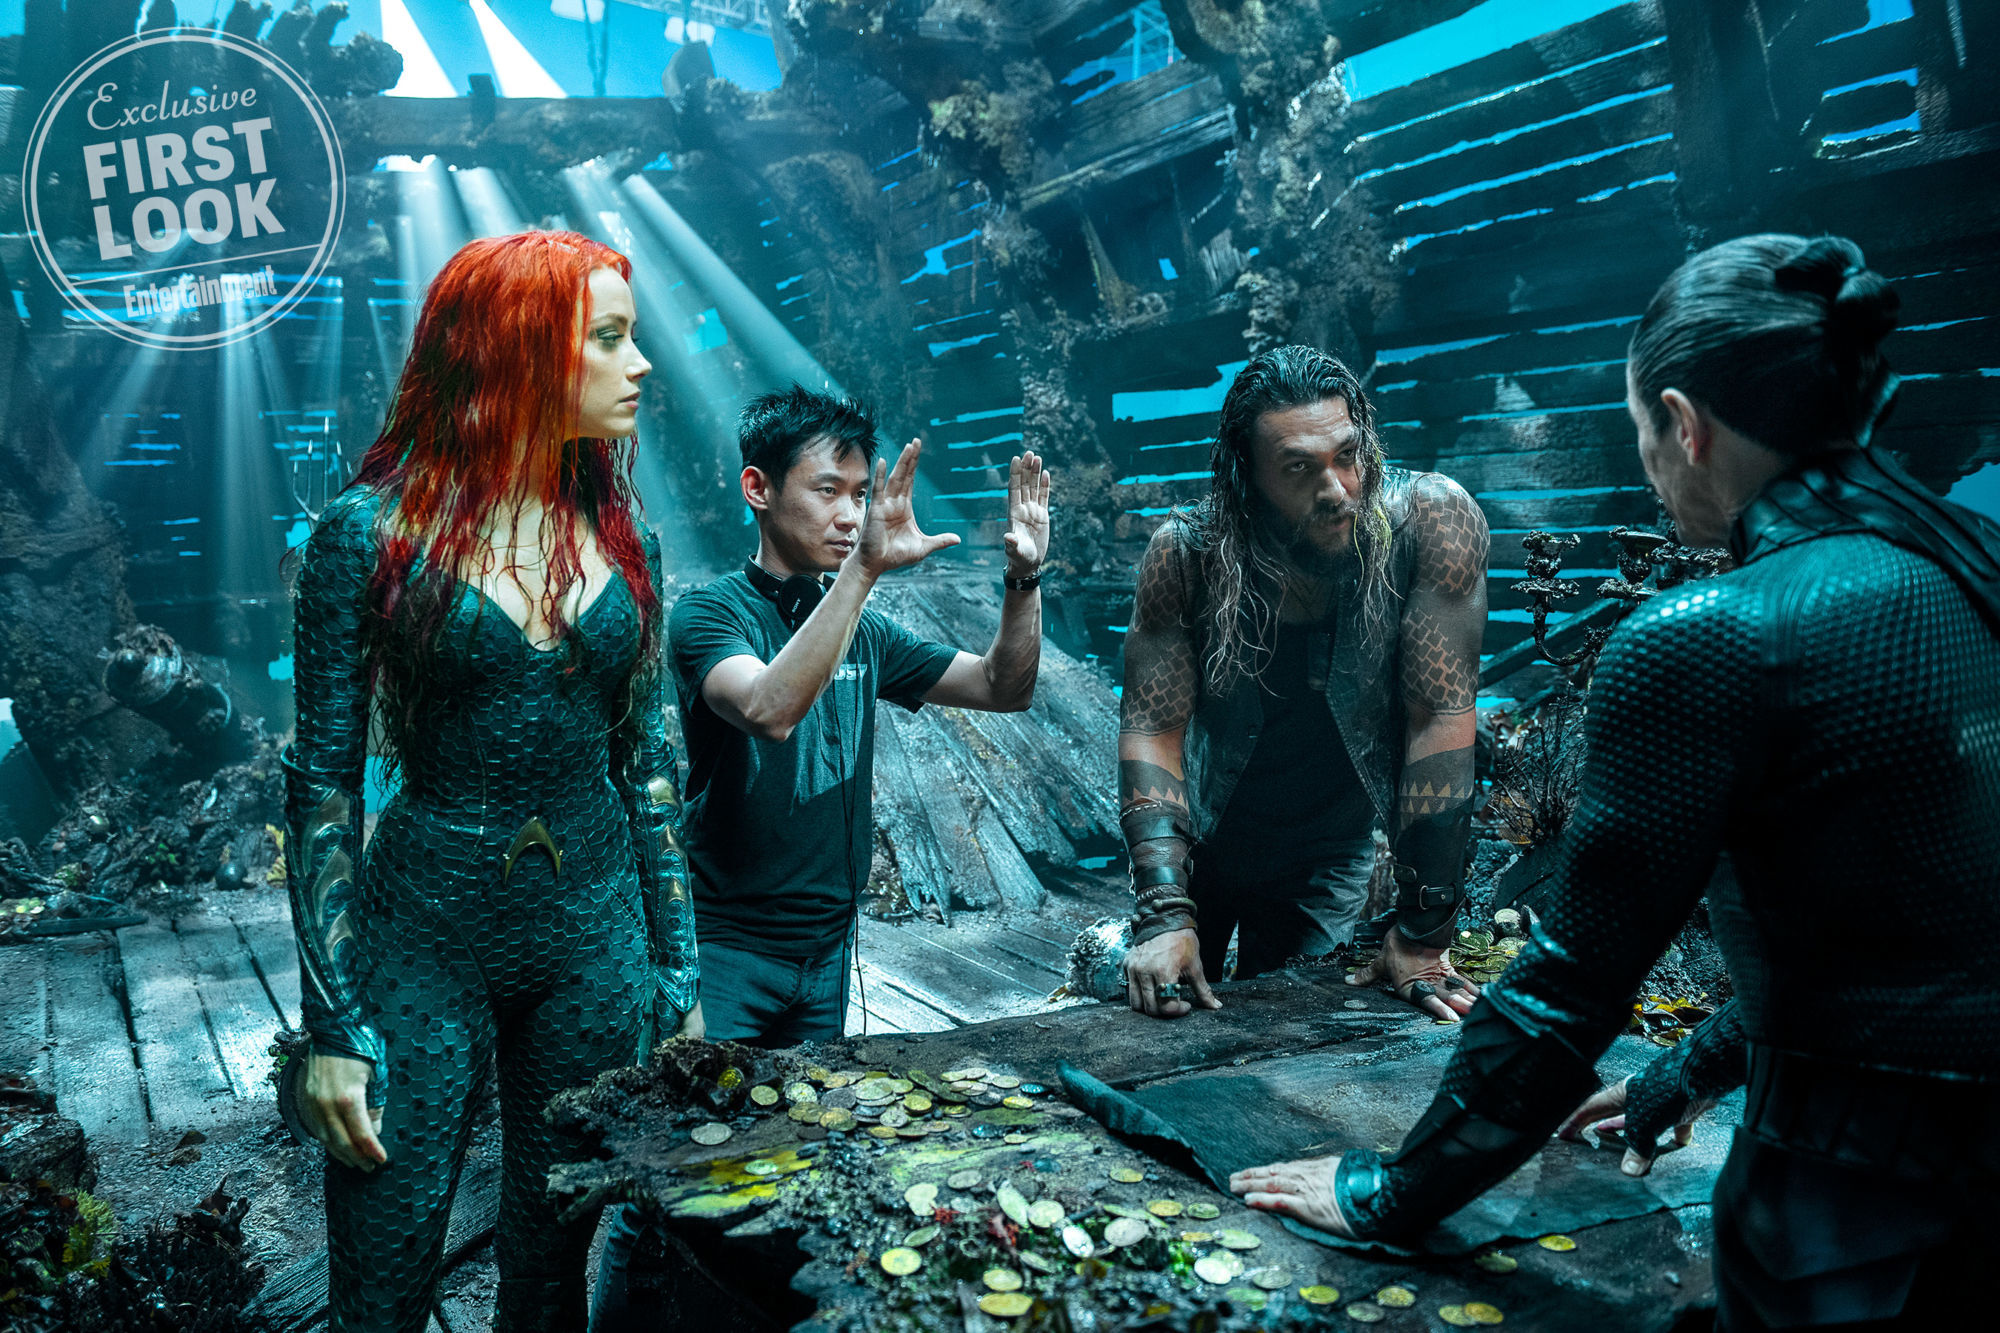 Watch the Aquaman trailer here.....